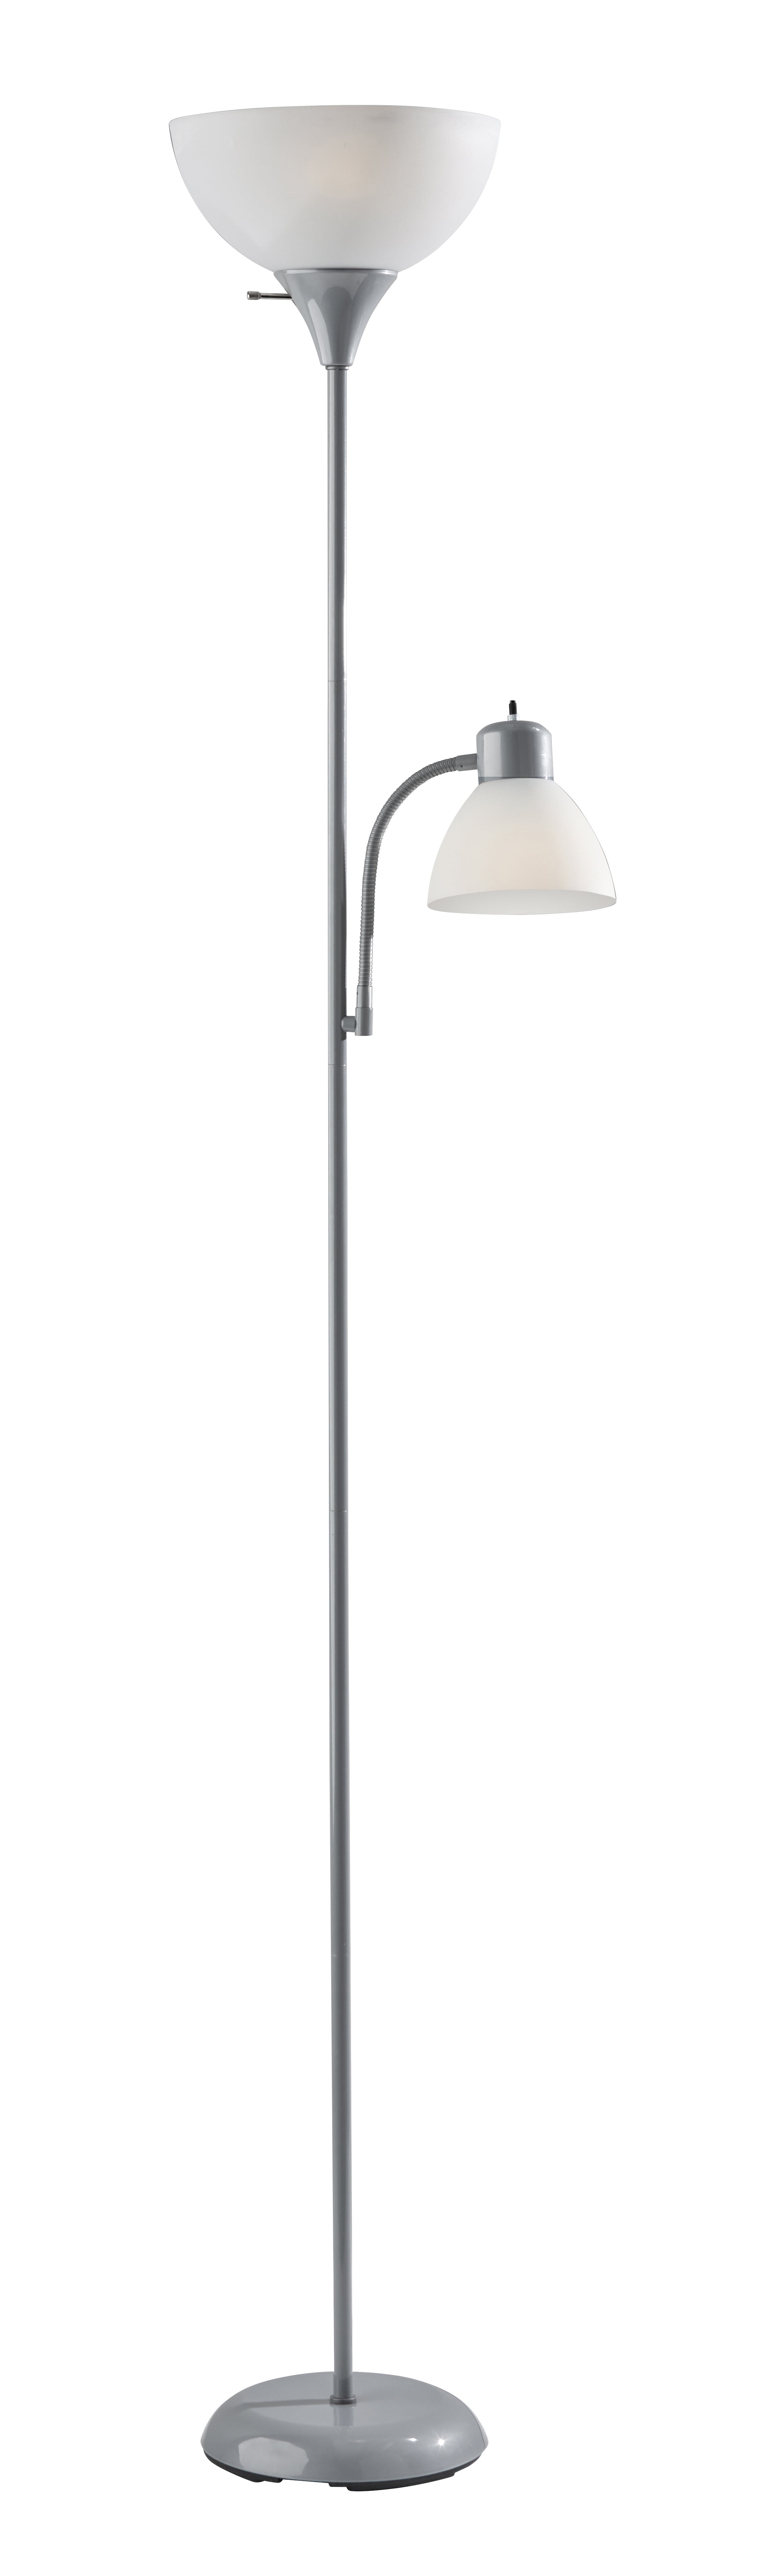 Standing Floor Lamp with Flexible Arm Light Adjustable Base Reading Home 